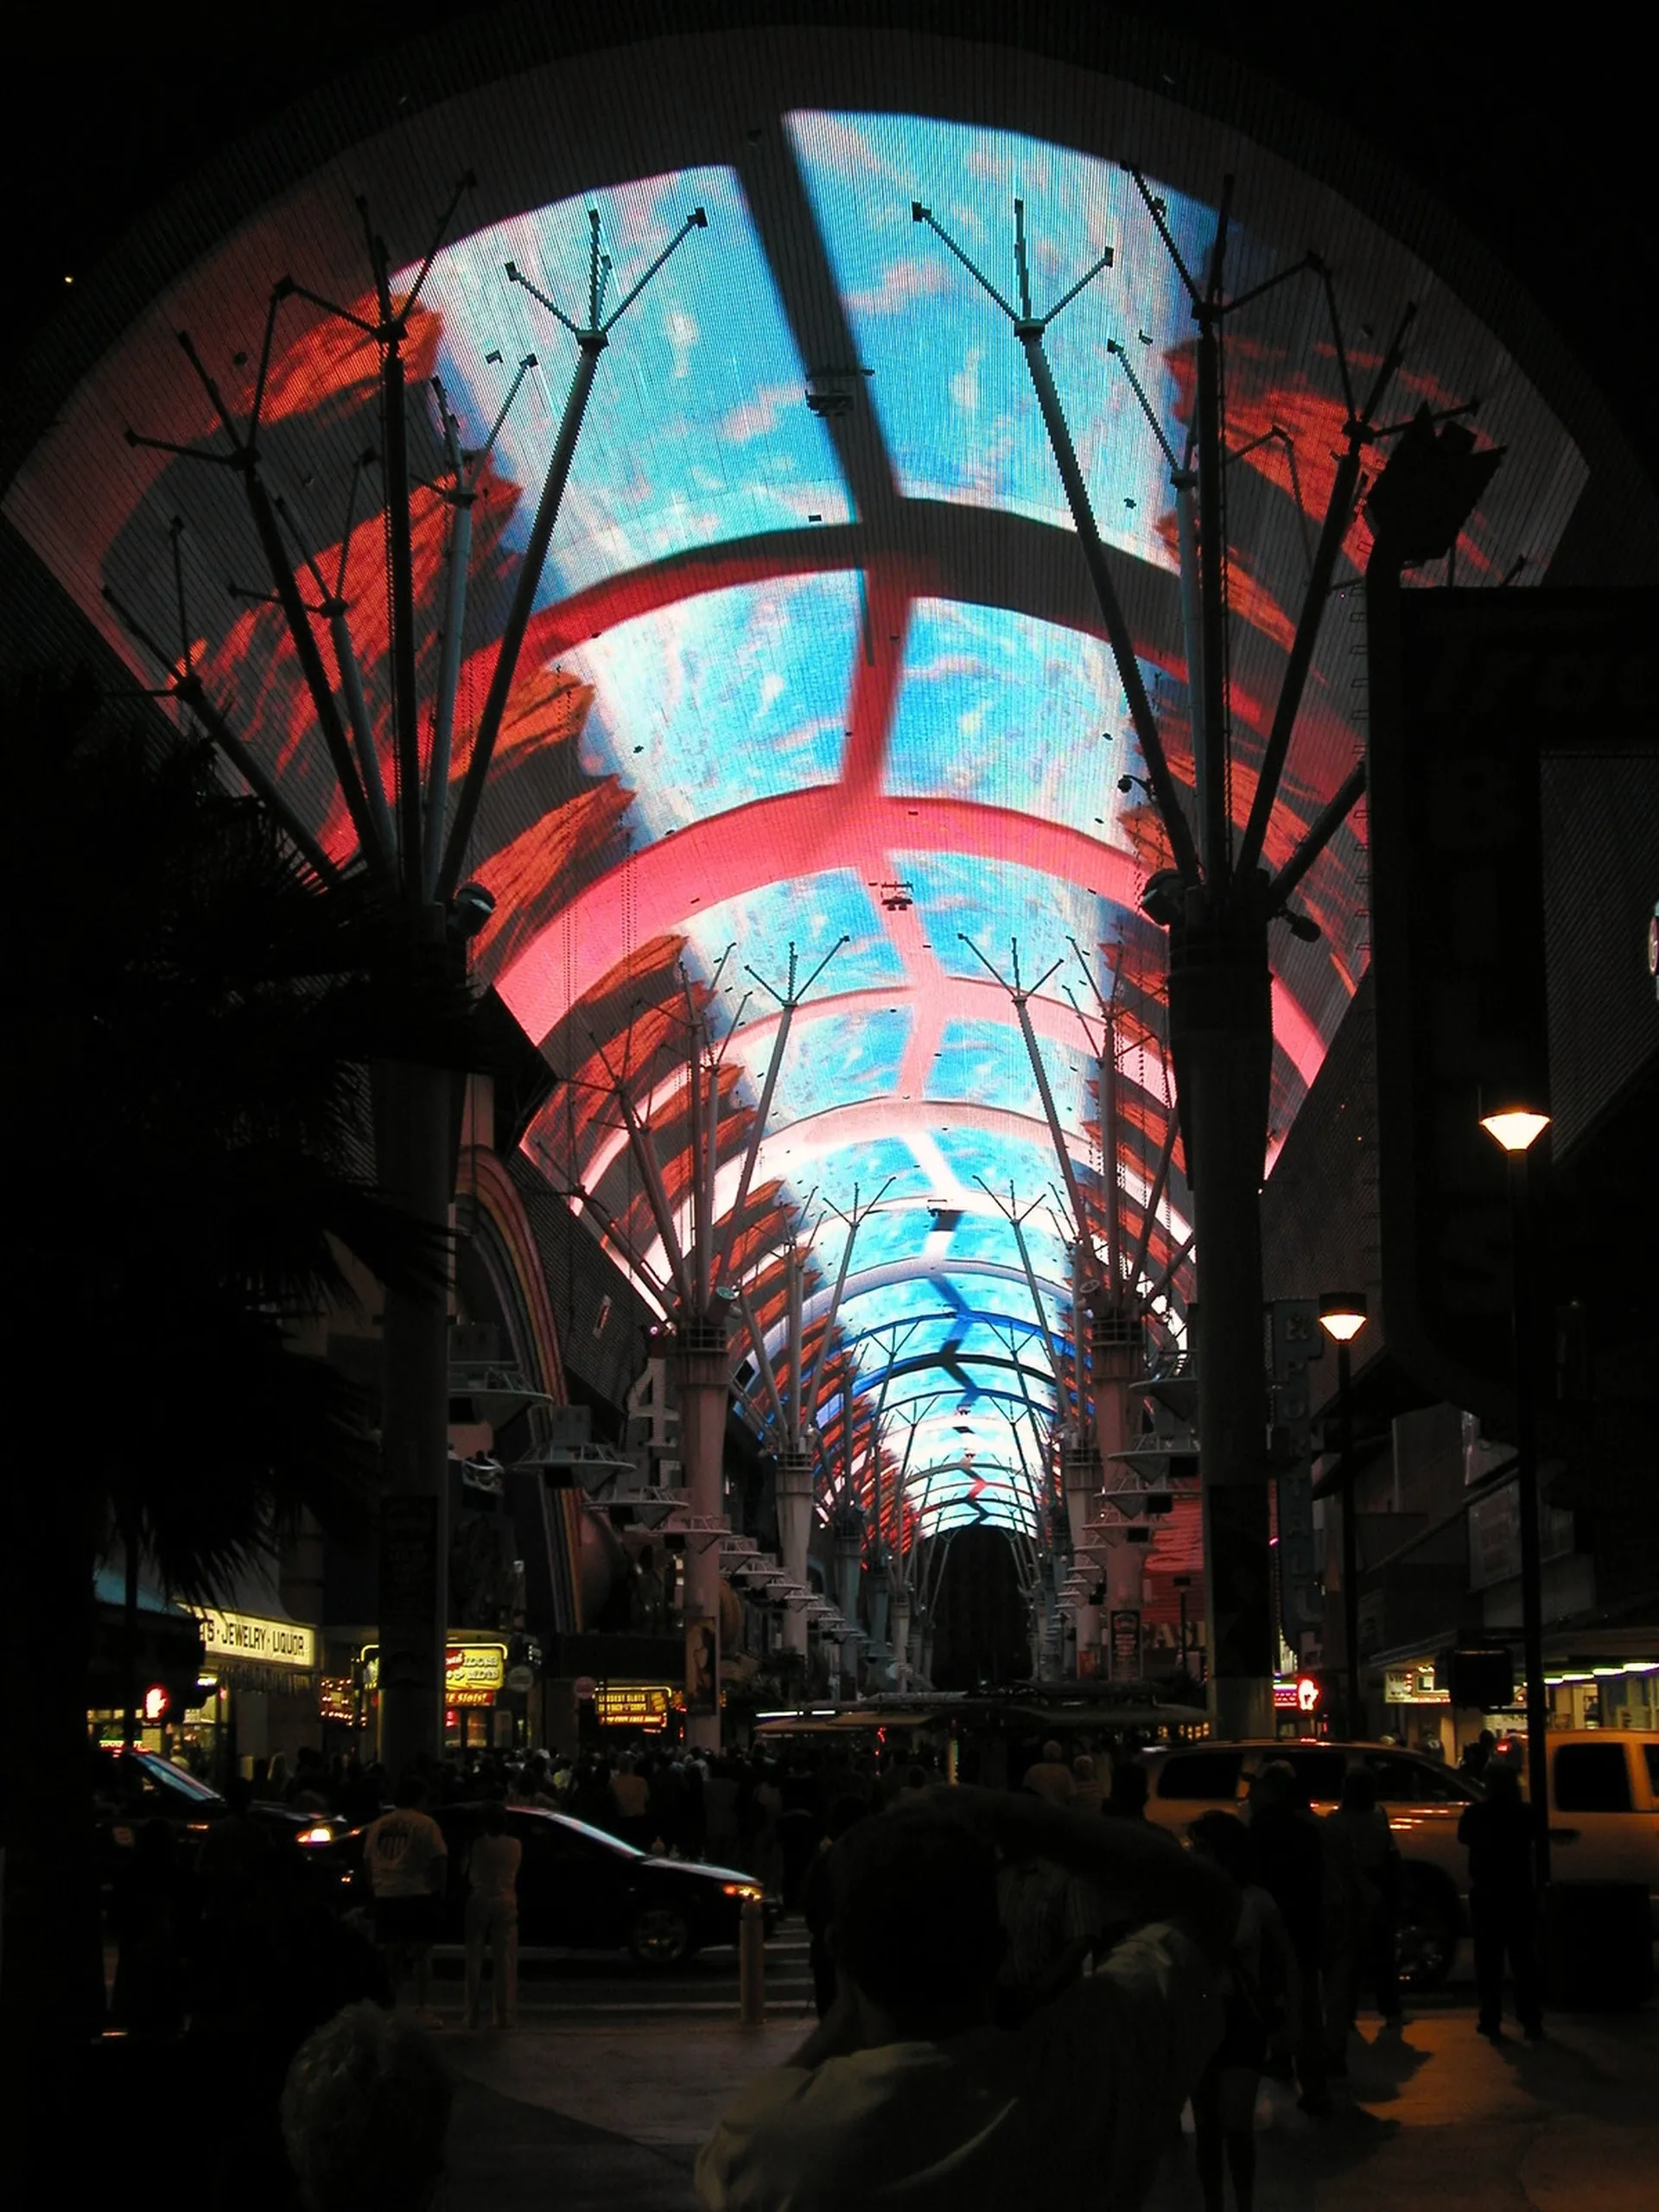 Freemont Street Experience